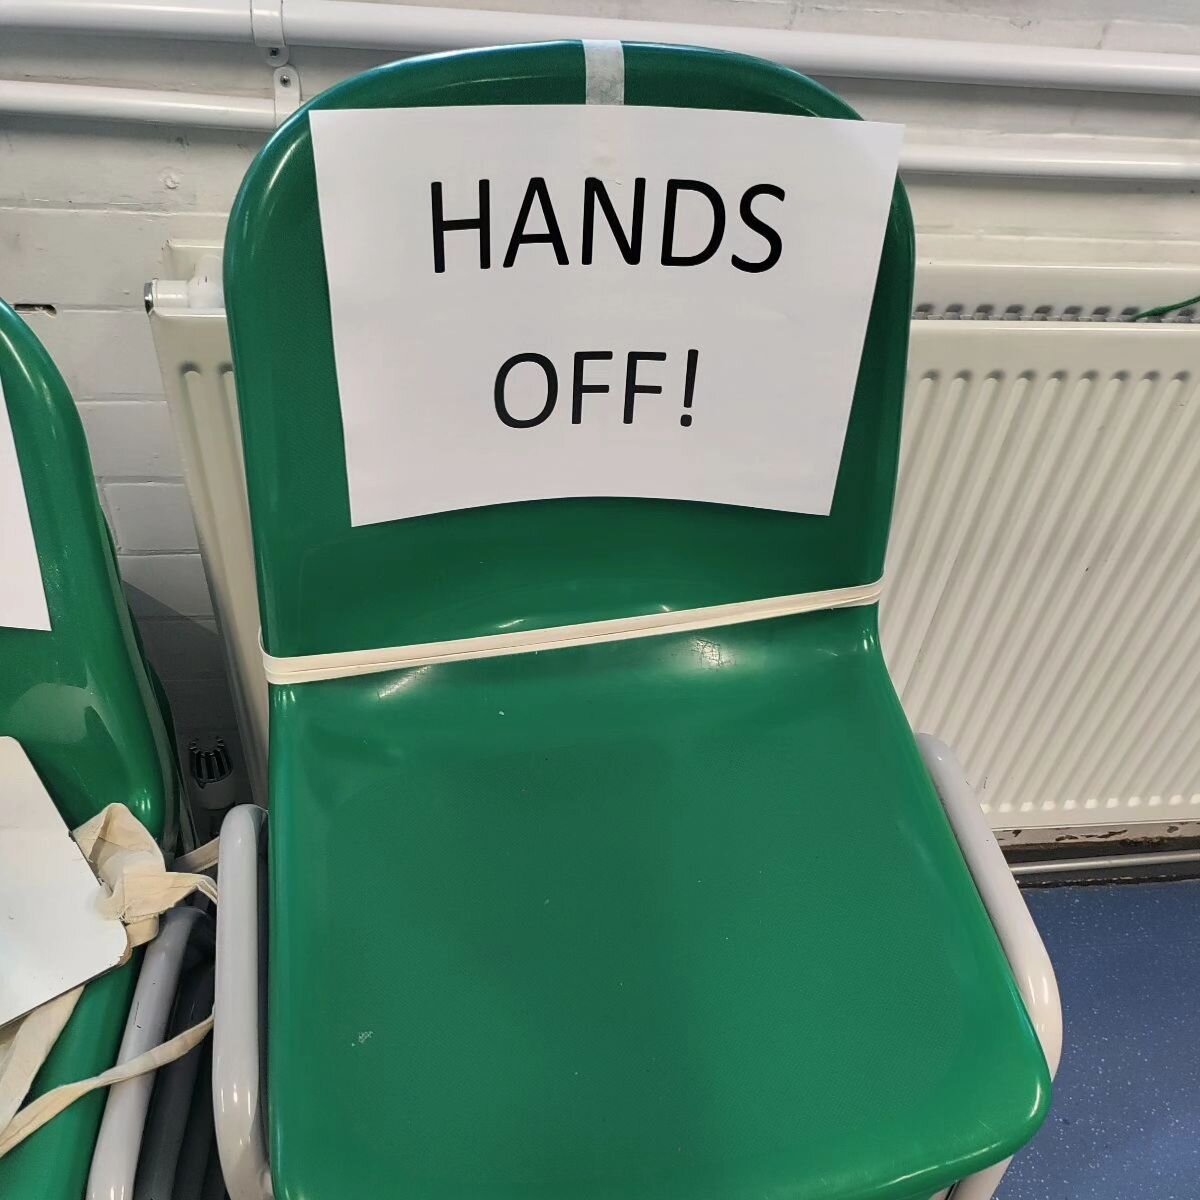 When Year 4 came into their classrooms, they realised their chairs had gone on strike! We had to practise using our best persuasive devices to write letters to convince them to let us use them again. Luckily, our rhetorical questions and emotive lang